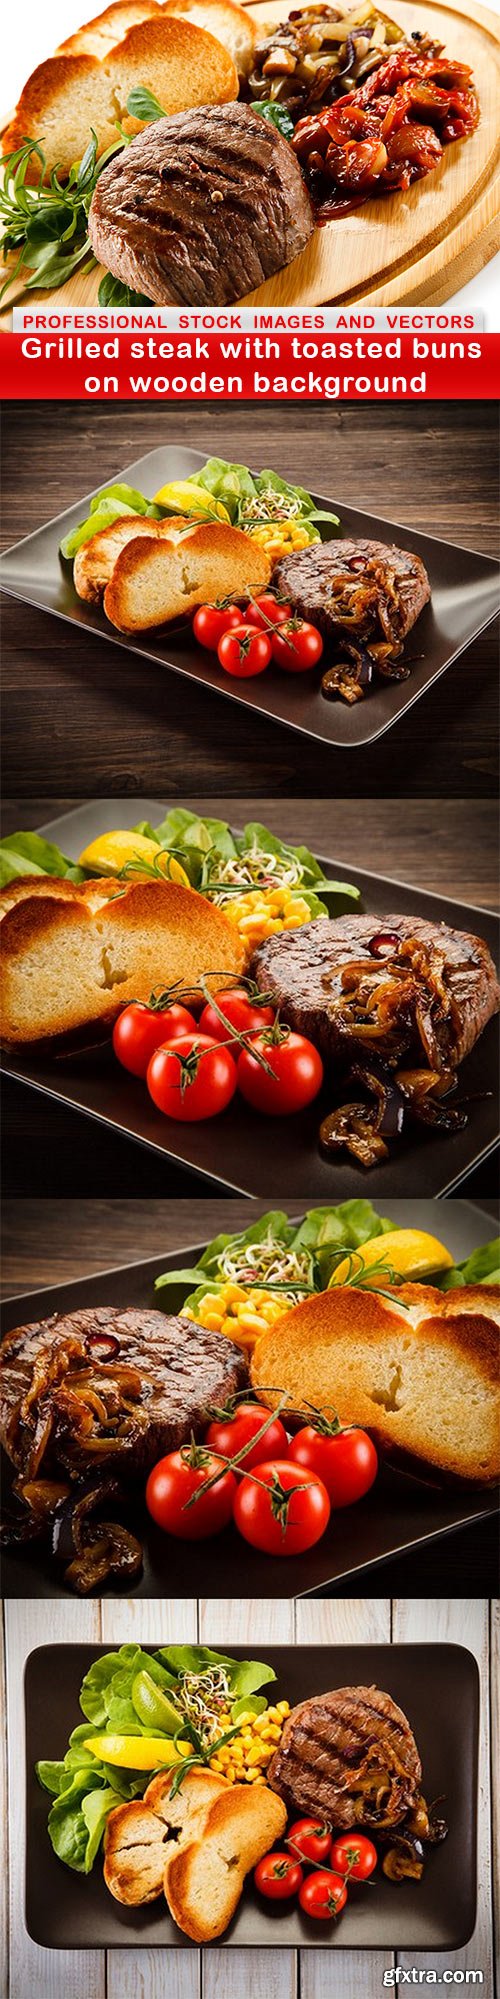 Grilled steak with toasted buns on wooden background - 5 UHQ JPEG